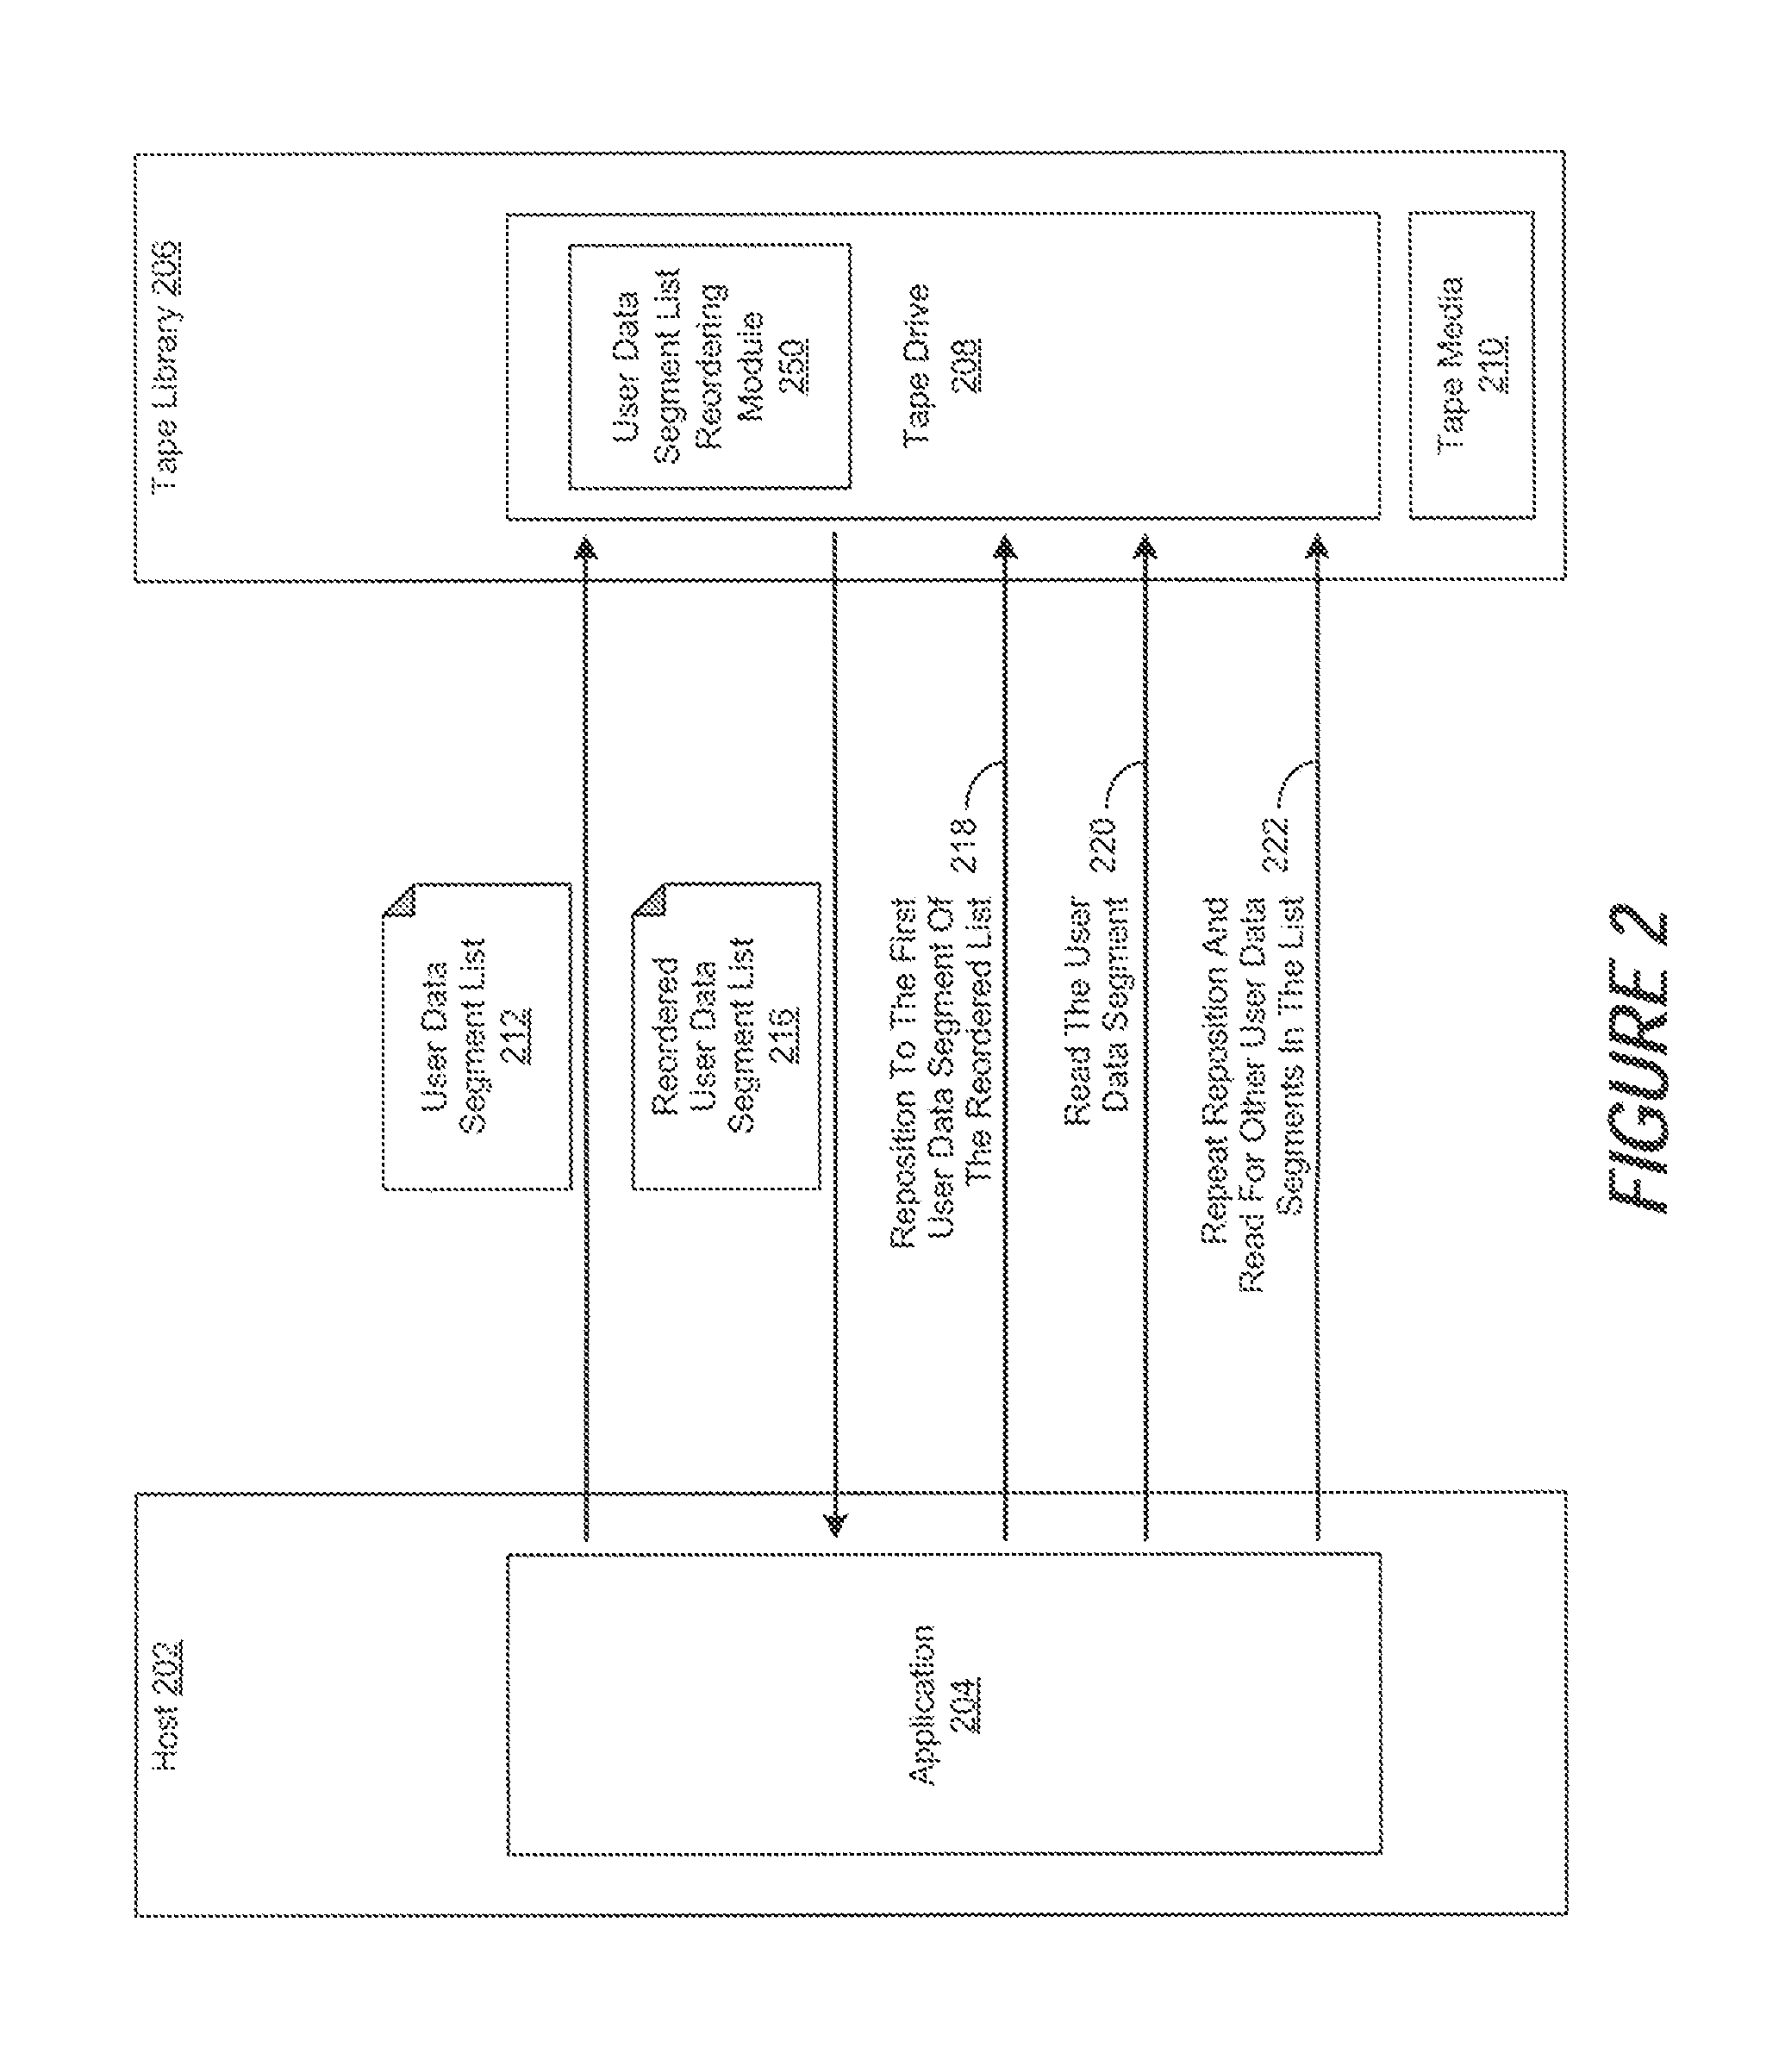 Method for Reordering Access to Reduce Total Seek Time on Tape Media